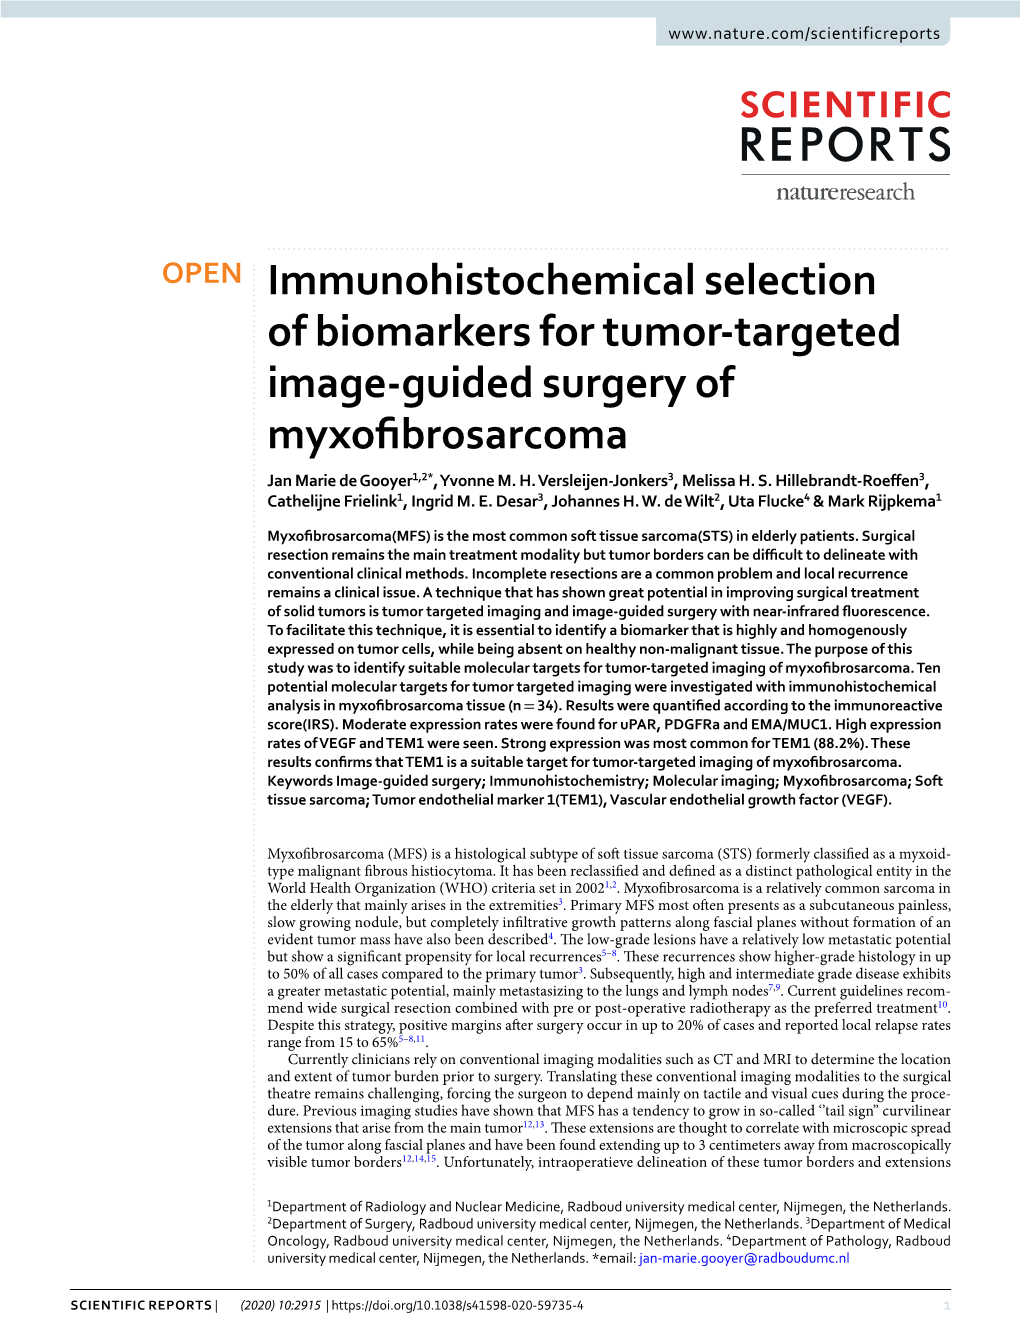 Immunohistochemical Selection of Biomarkers for Tumor-Targeted Image-Guided Surgery of Myxofbrosarcoma Jan Marie De Gooyer1,2*, Yvonne M